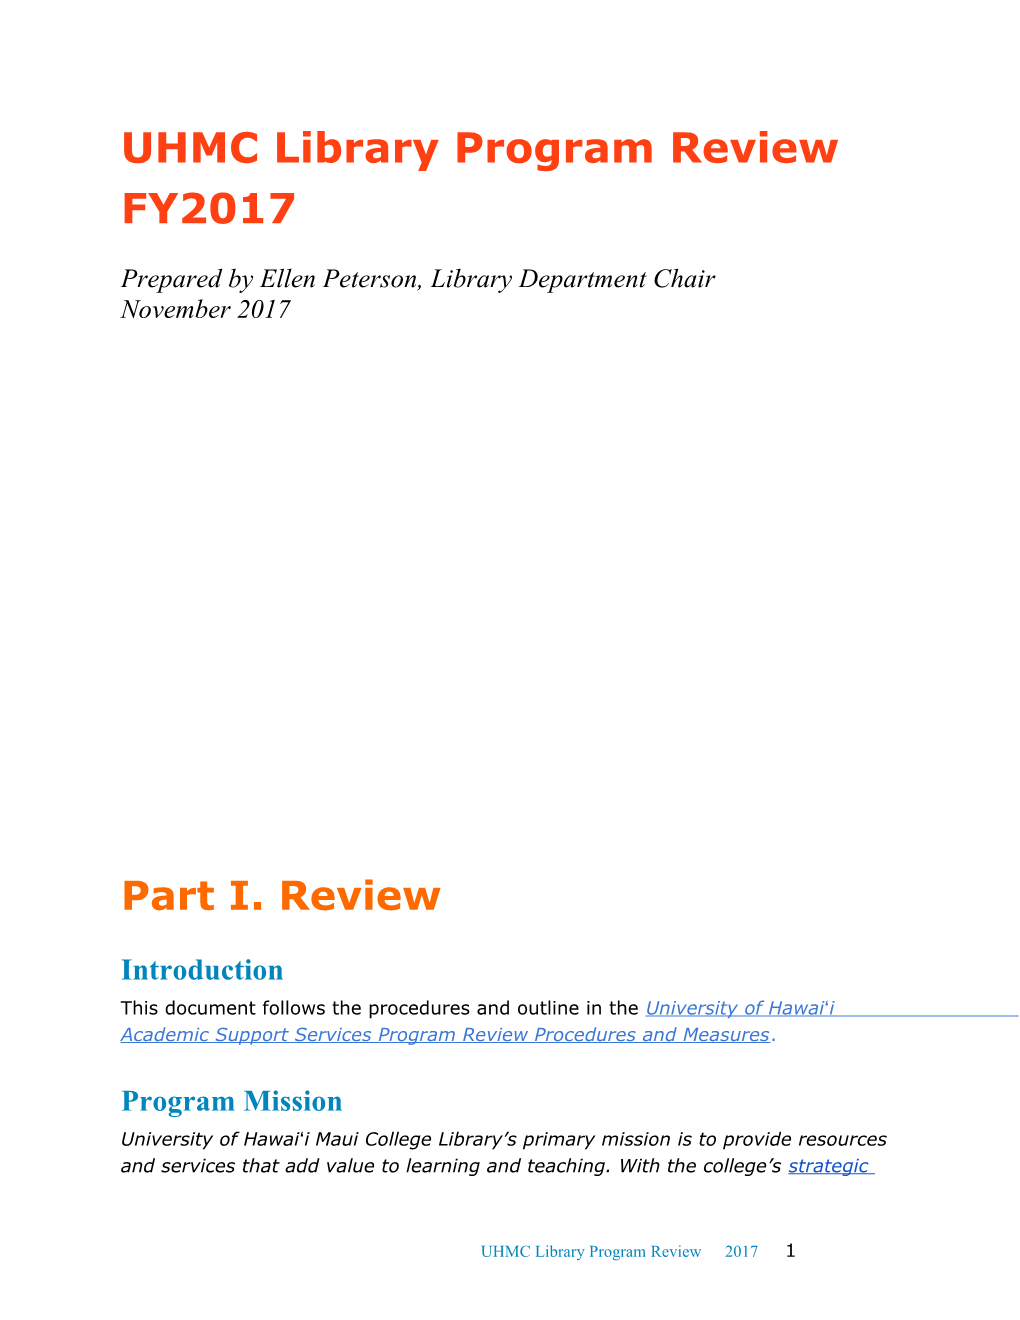 UHMC Library Program Review FY2017